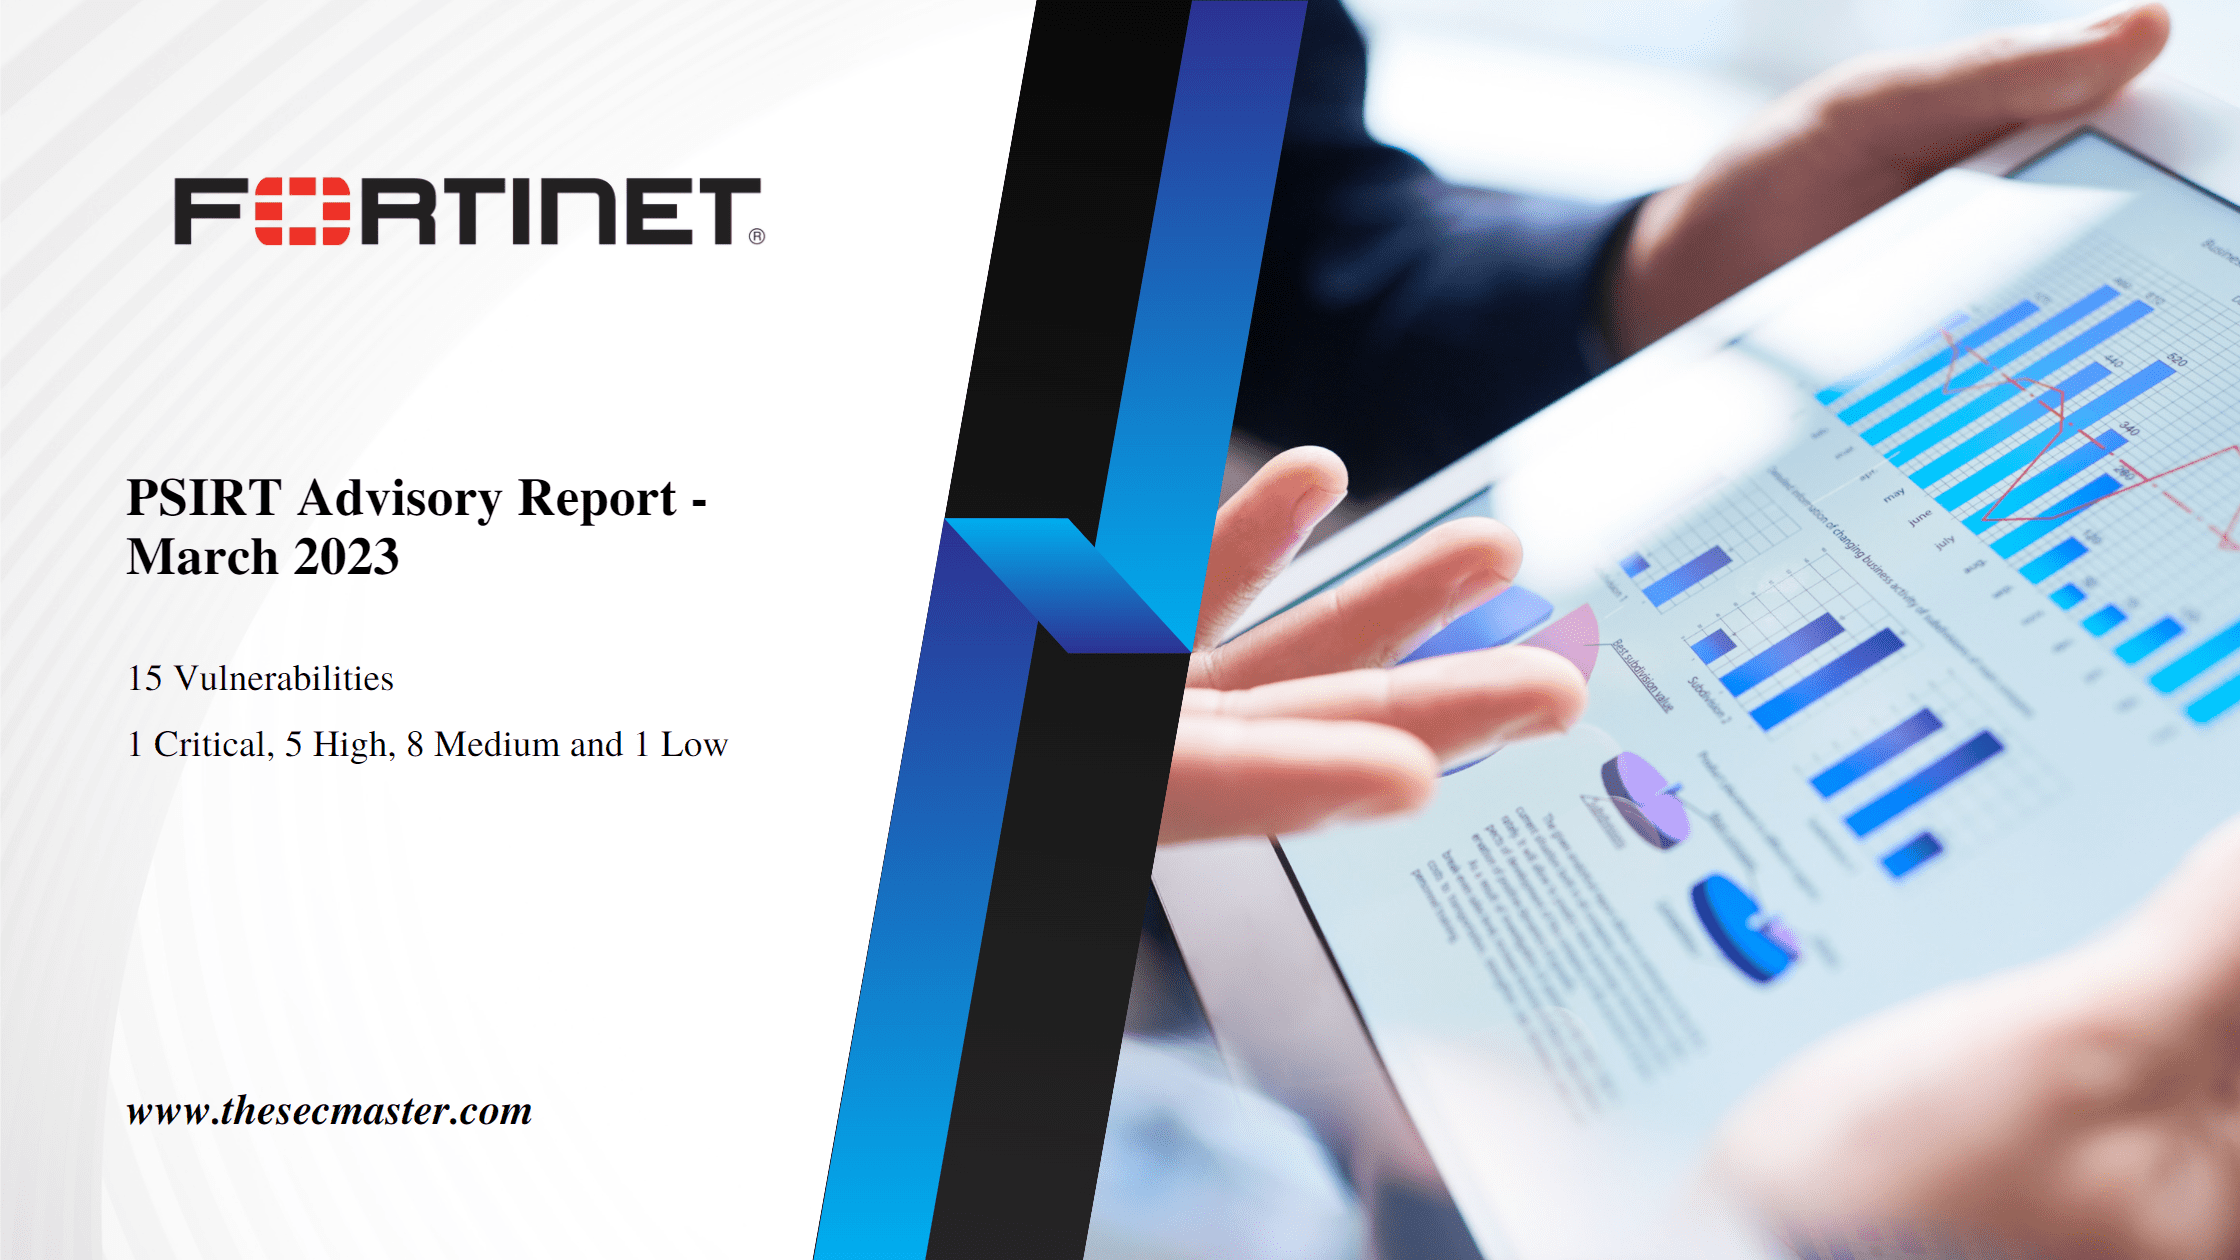 Breaking Down The March 2023 Monthly Psirt Advisory Report From Fortinet